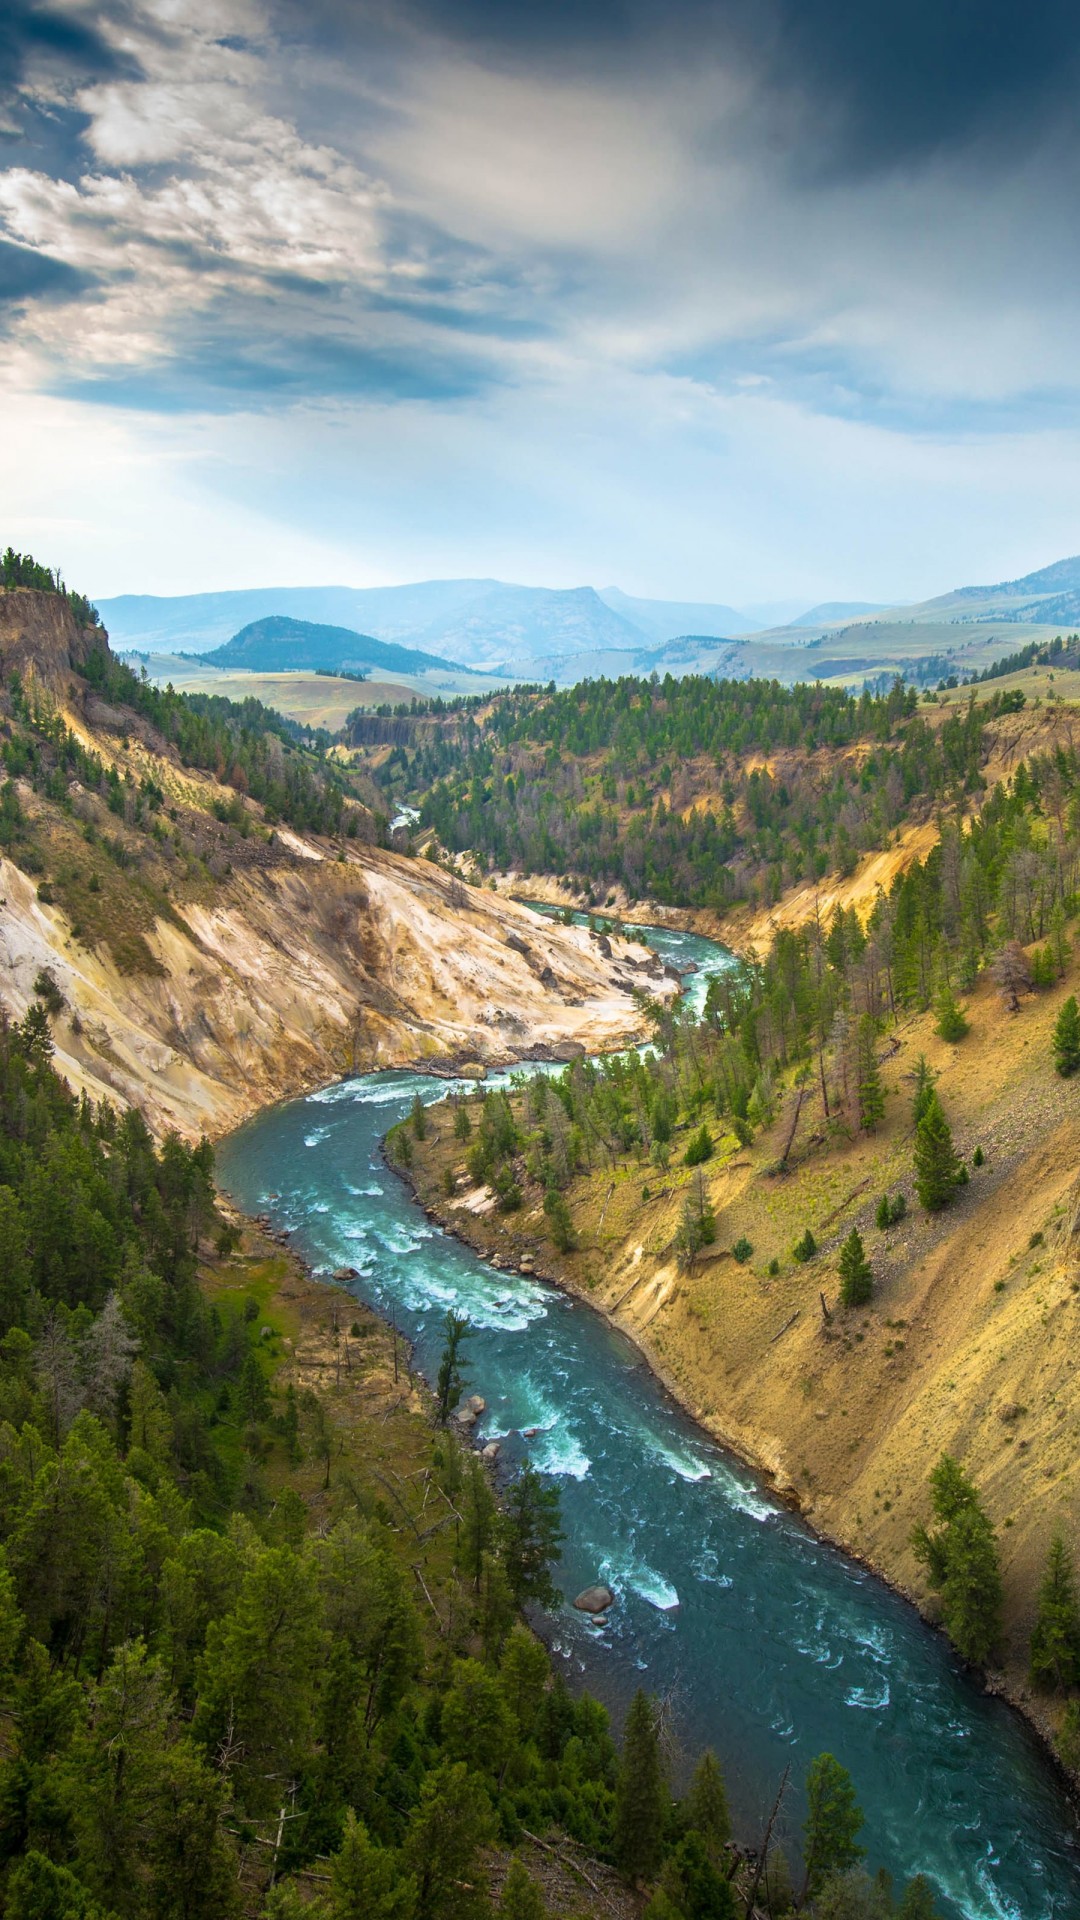 The River, Grand Canyon of Yellowstone National Park, USA Wallpaper for SONY Xperia Z2